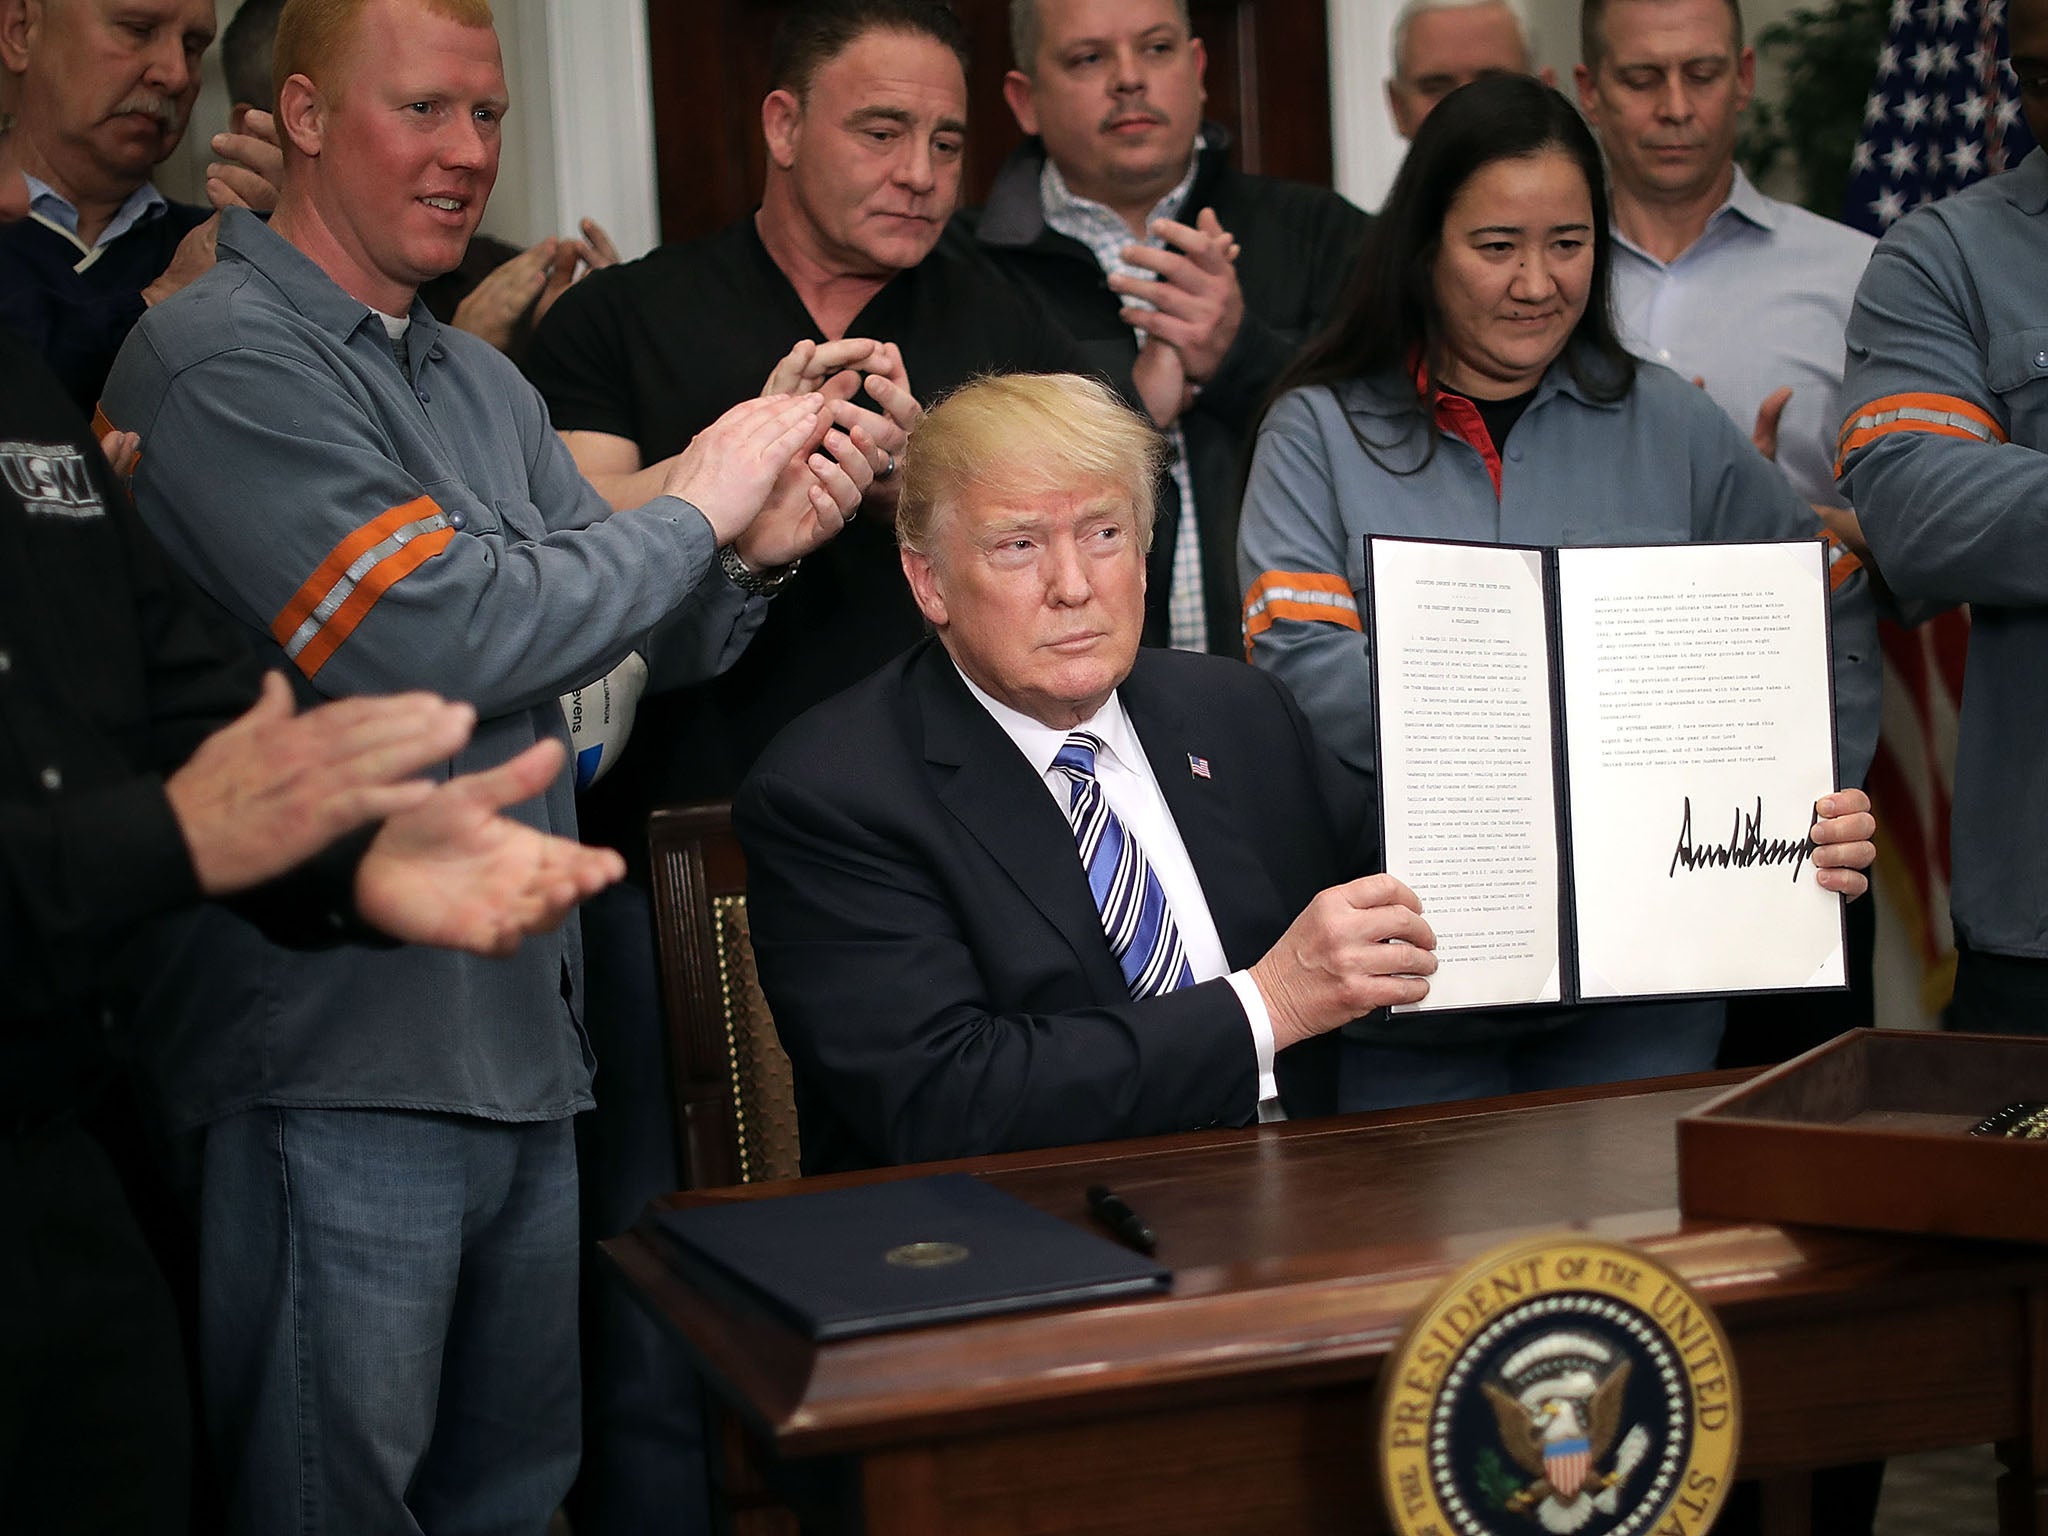 Earlier this year, Donald Trump announced that he would impose a 25 per cent tariff on imported steel and a 10 per cent tariff on imported aluminum